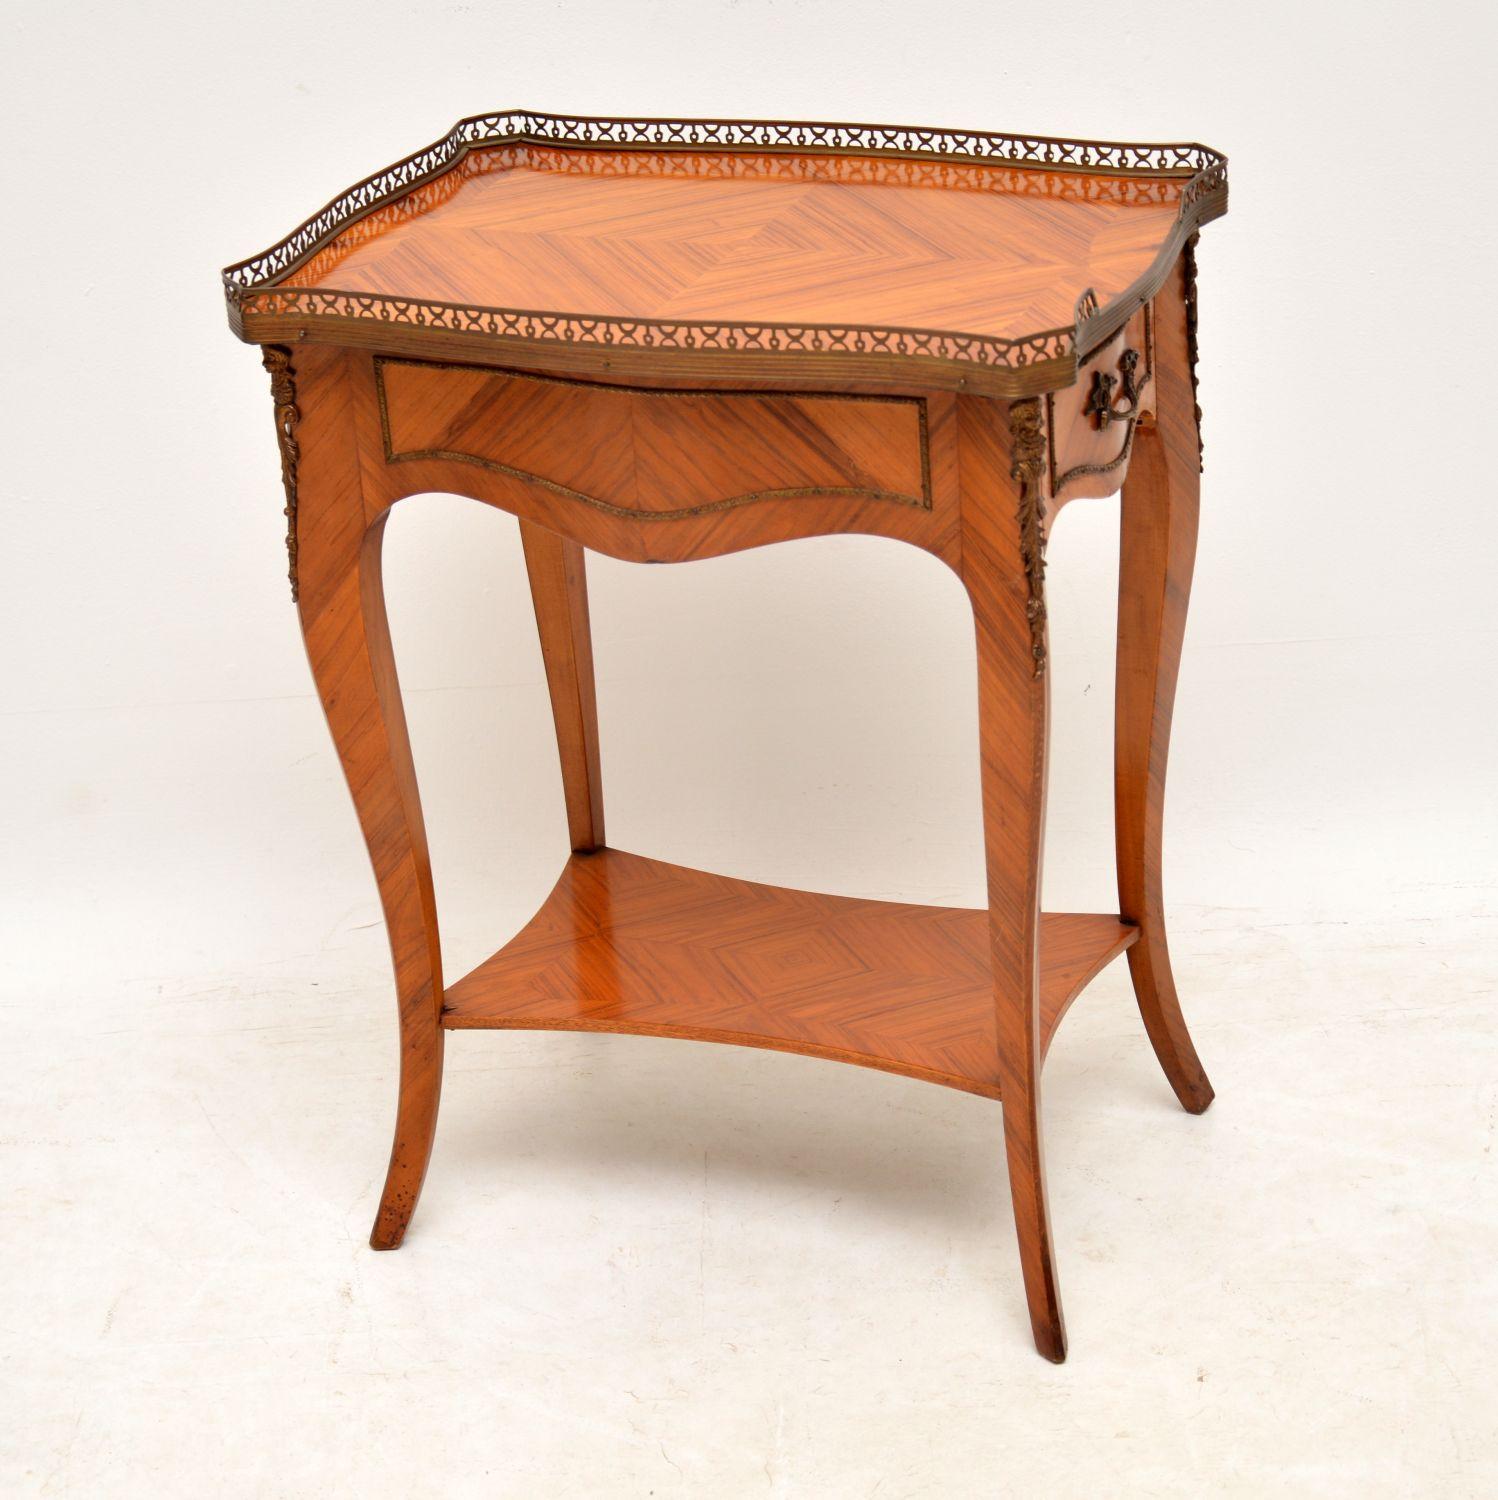 Kingwood Antique French King Wood Side Table